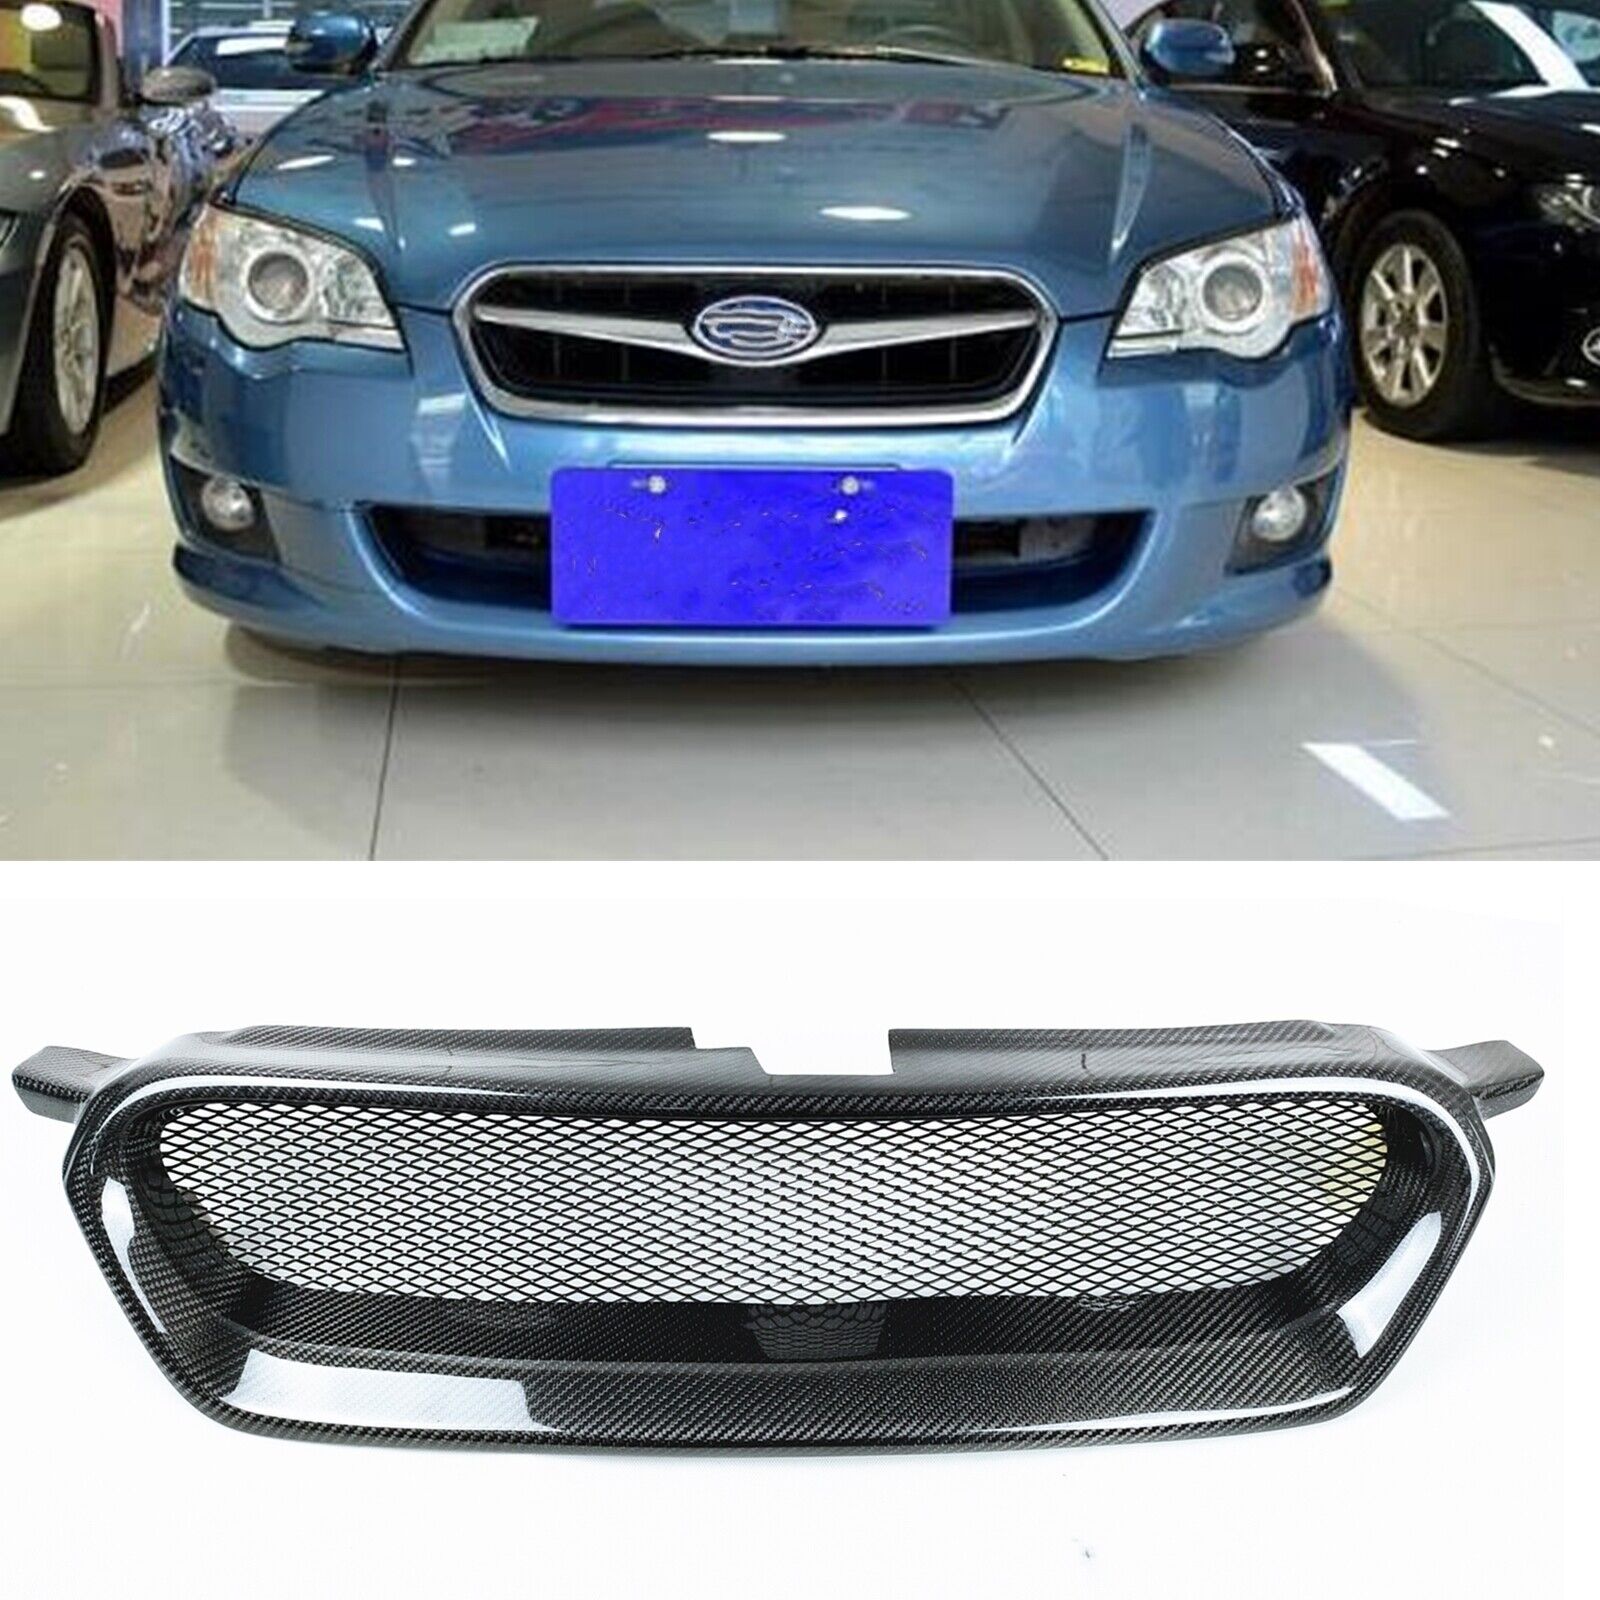 For Subaru Legacy 2008-2009 Black Front Bumper Honeycomb Grill Grille Body Kit